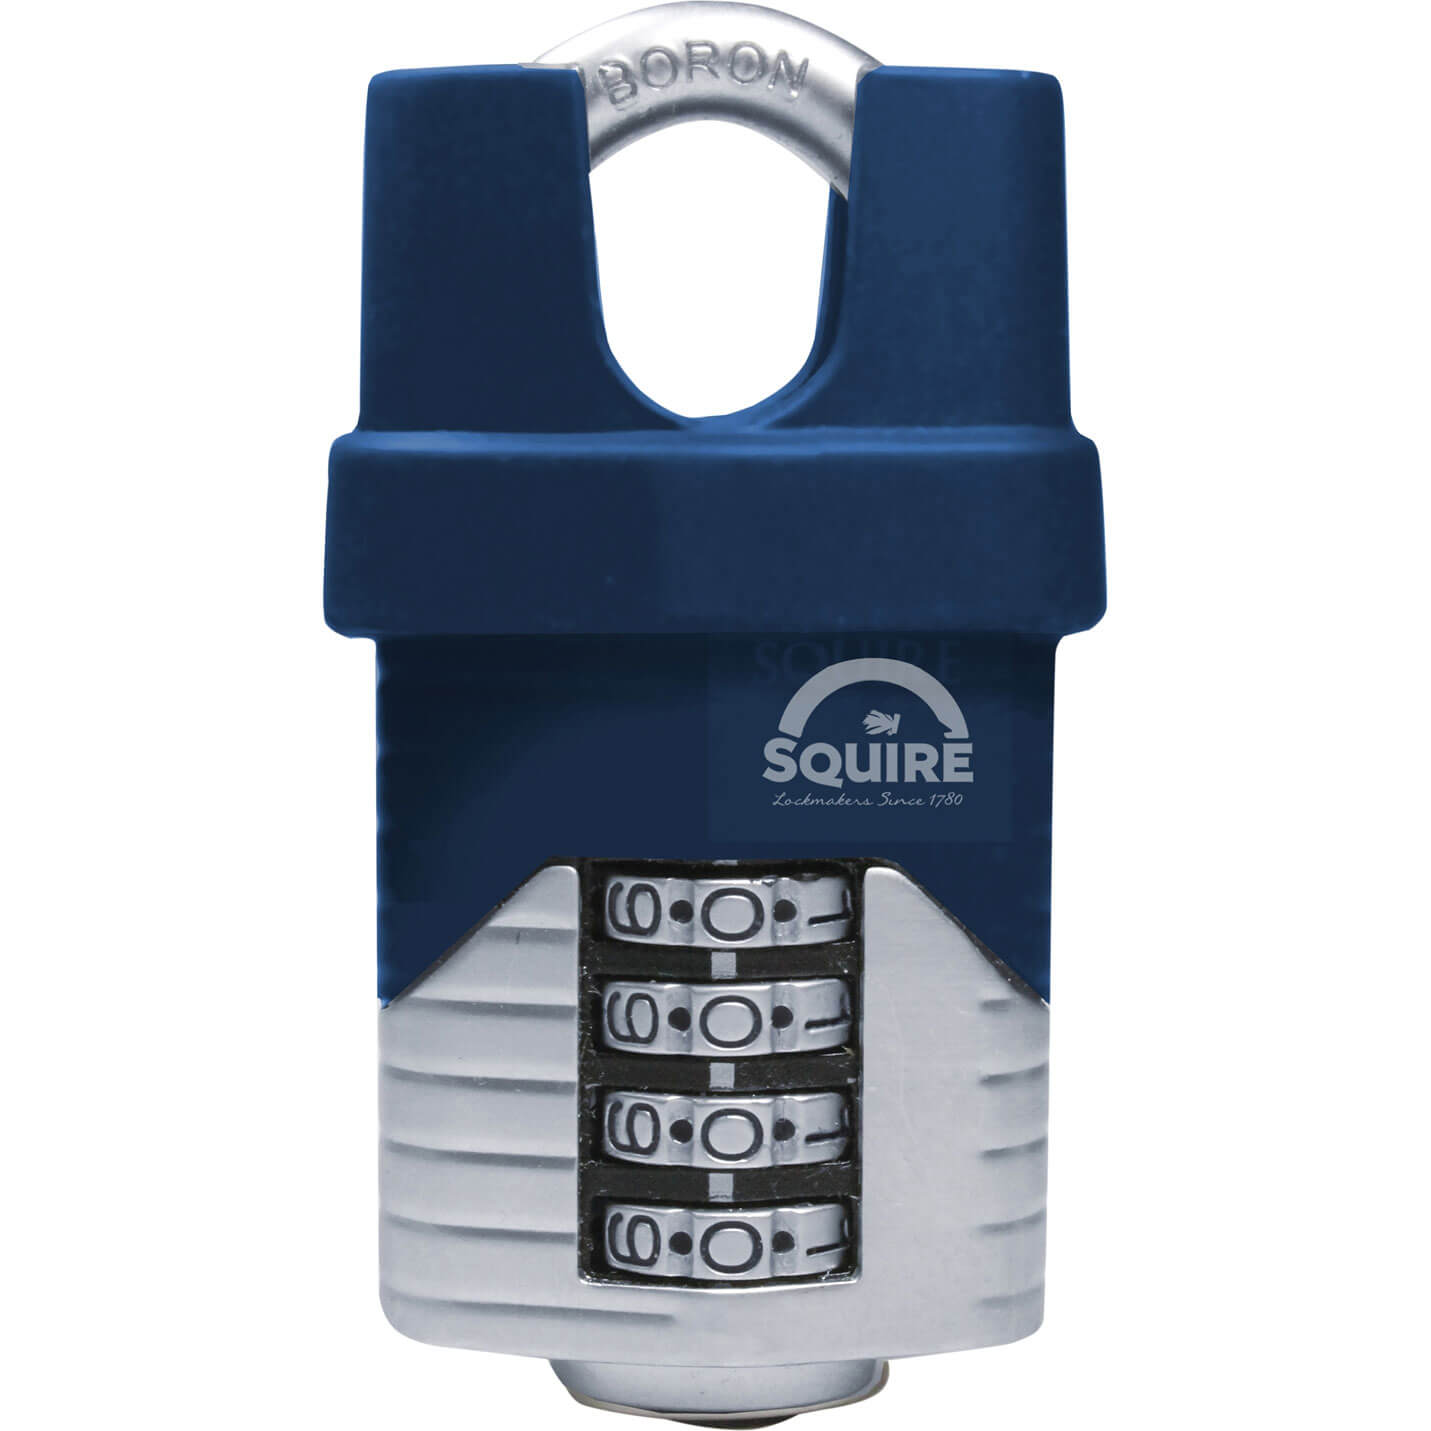 Image of Henry Squire Vulcan Boron Shackle Combination Padlock 50mm Closed